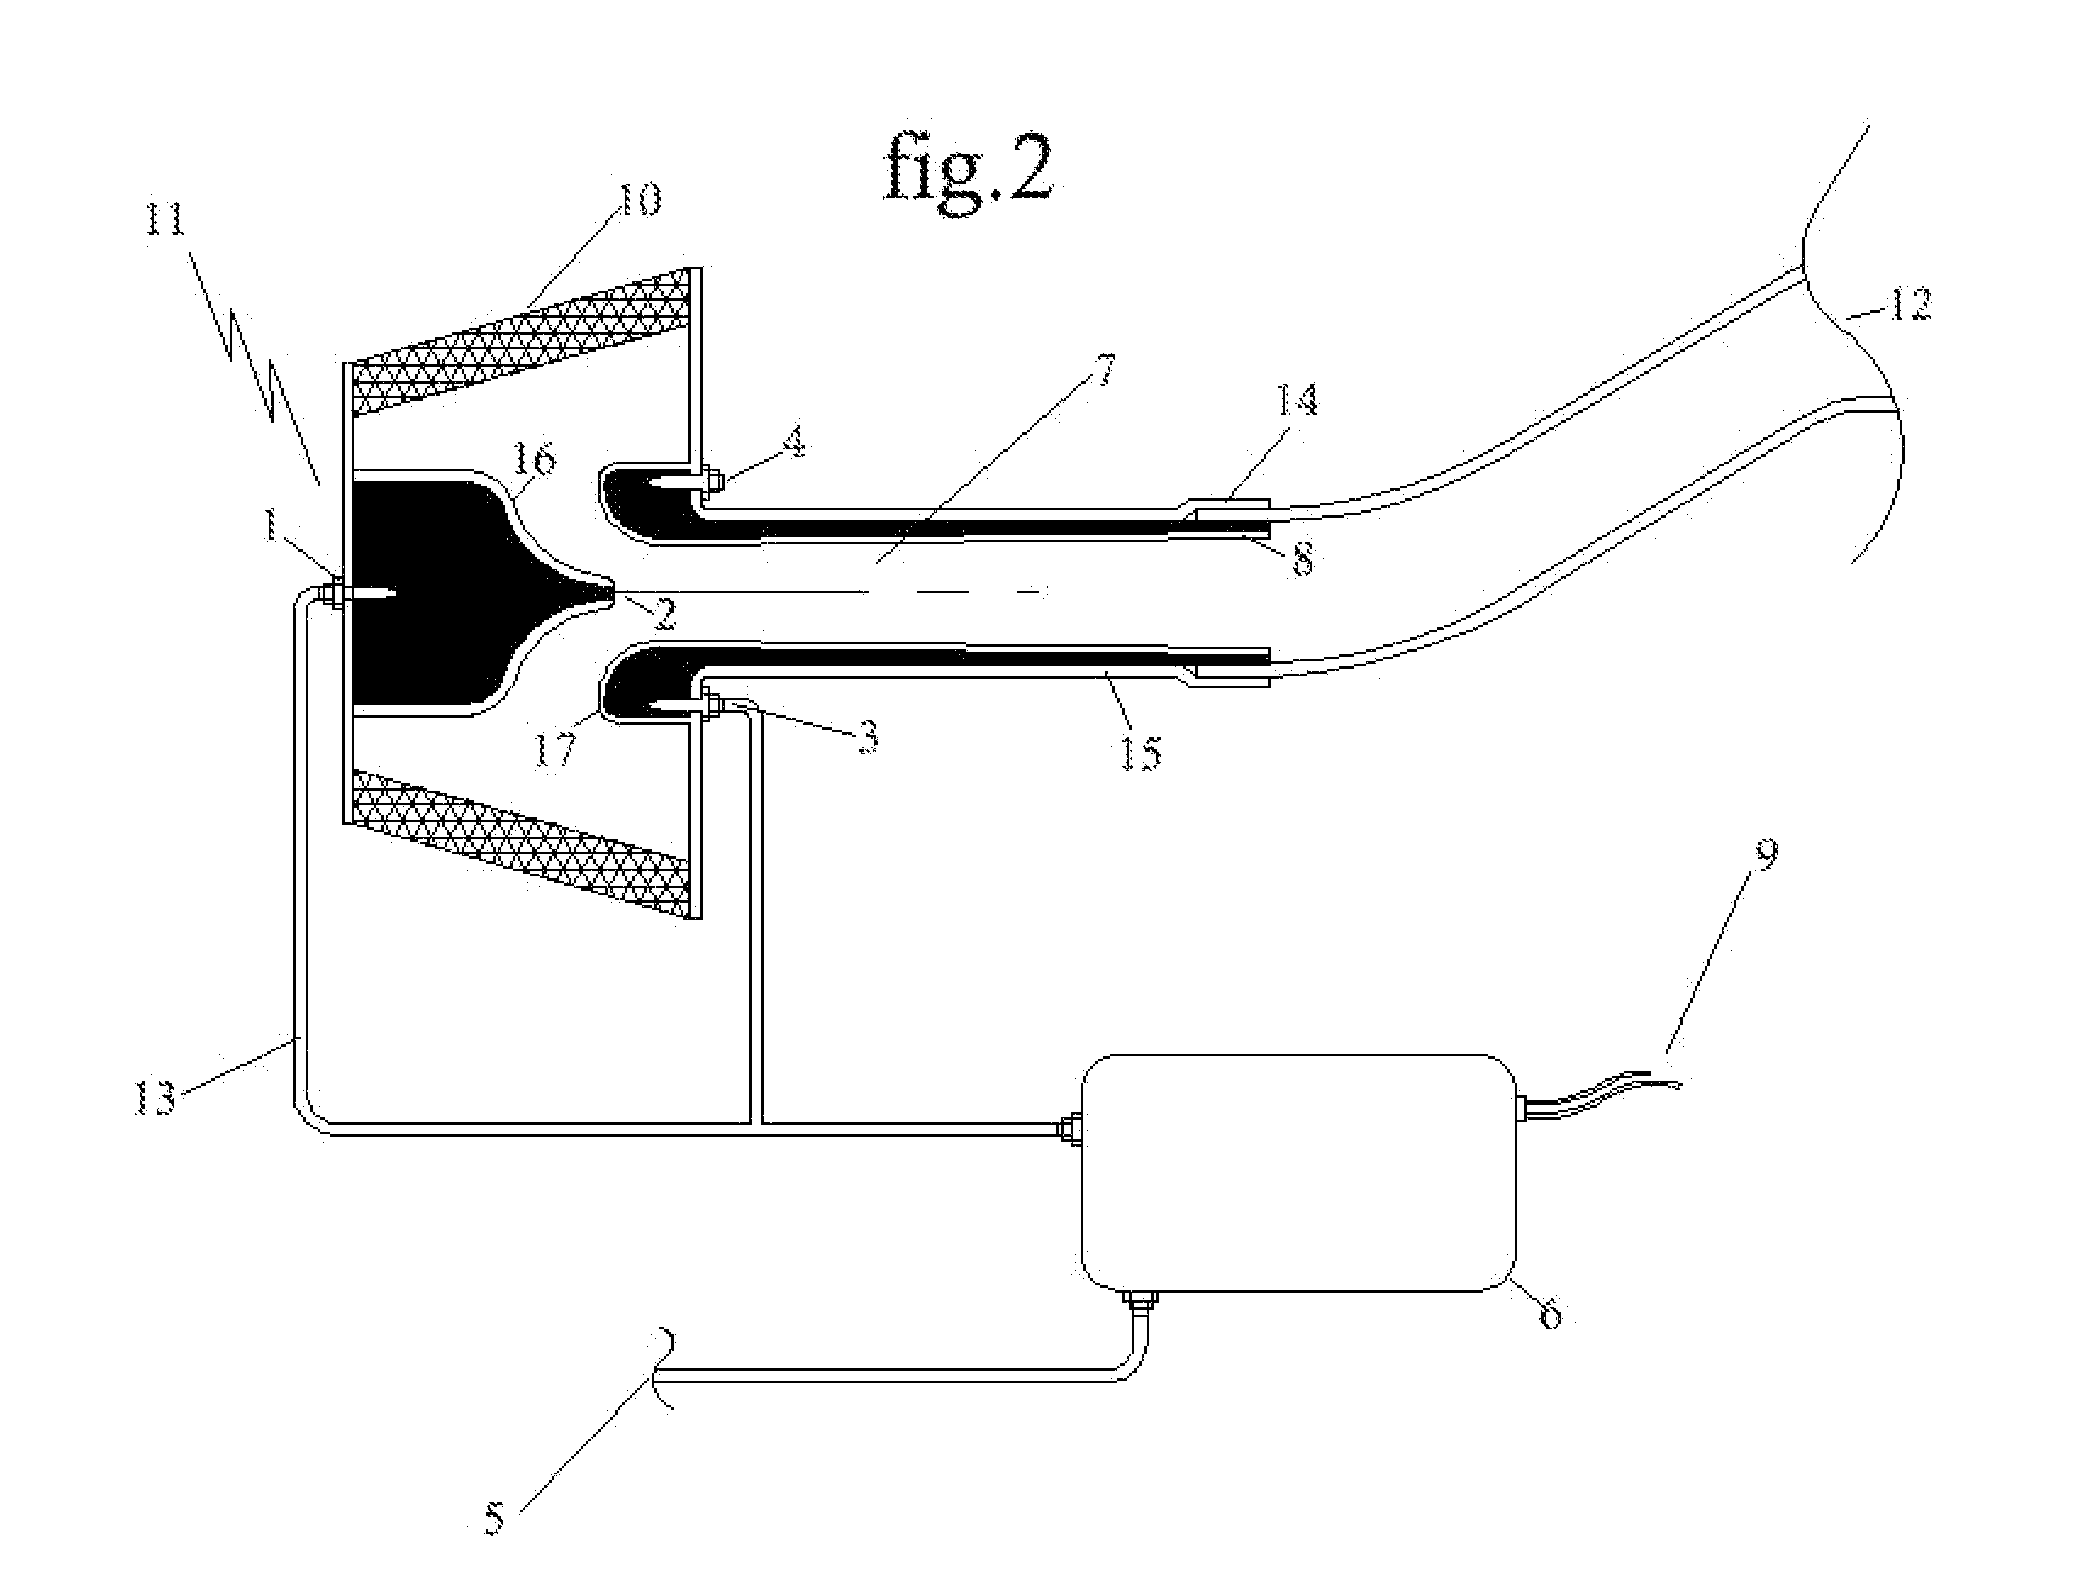 Apparatus for the multiplication of air flow in internal combustion engines increasing horsepower and torque, while reducing emissions